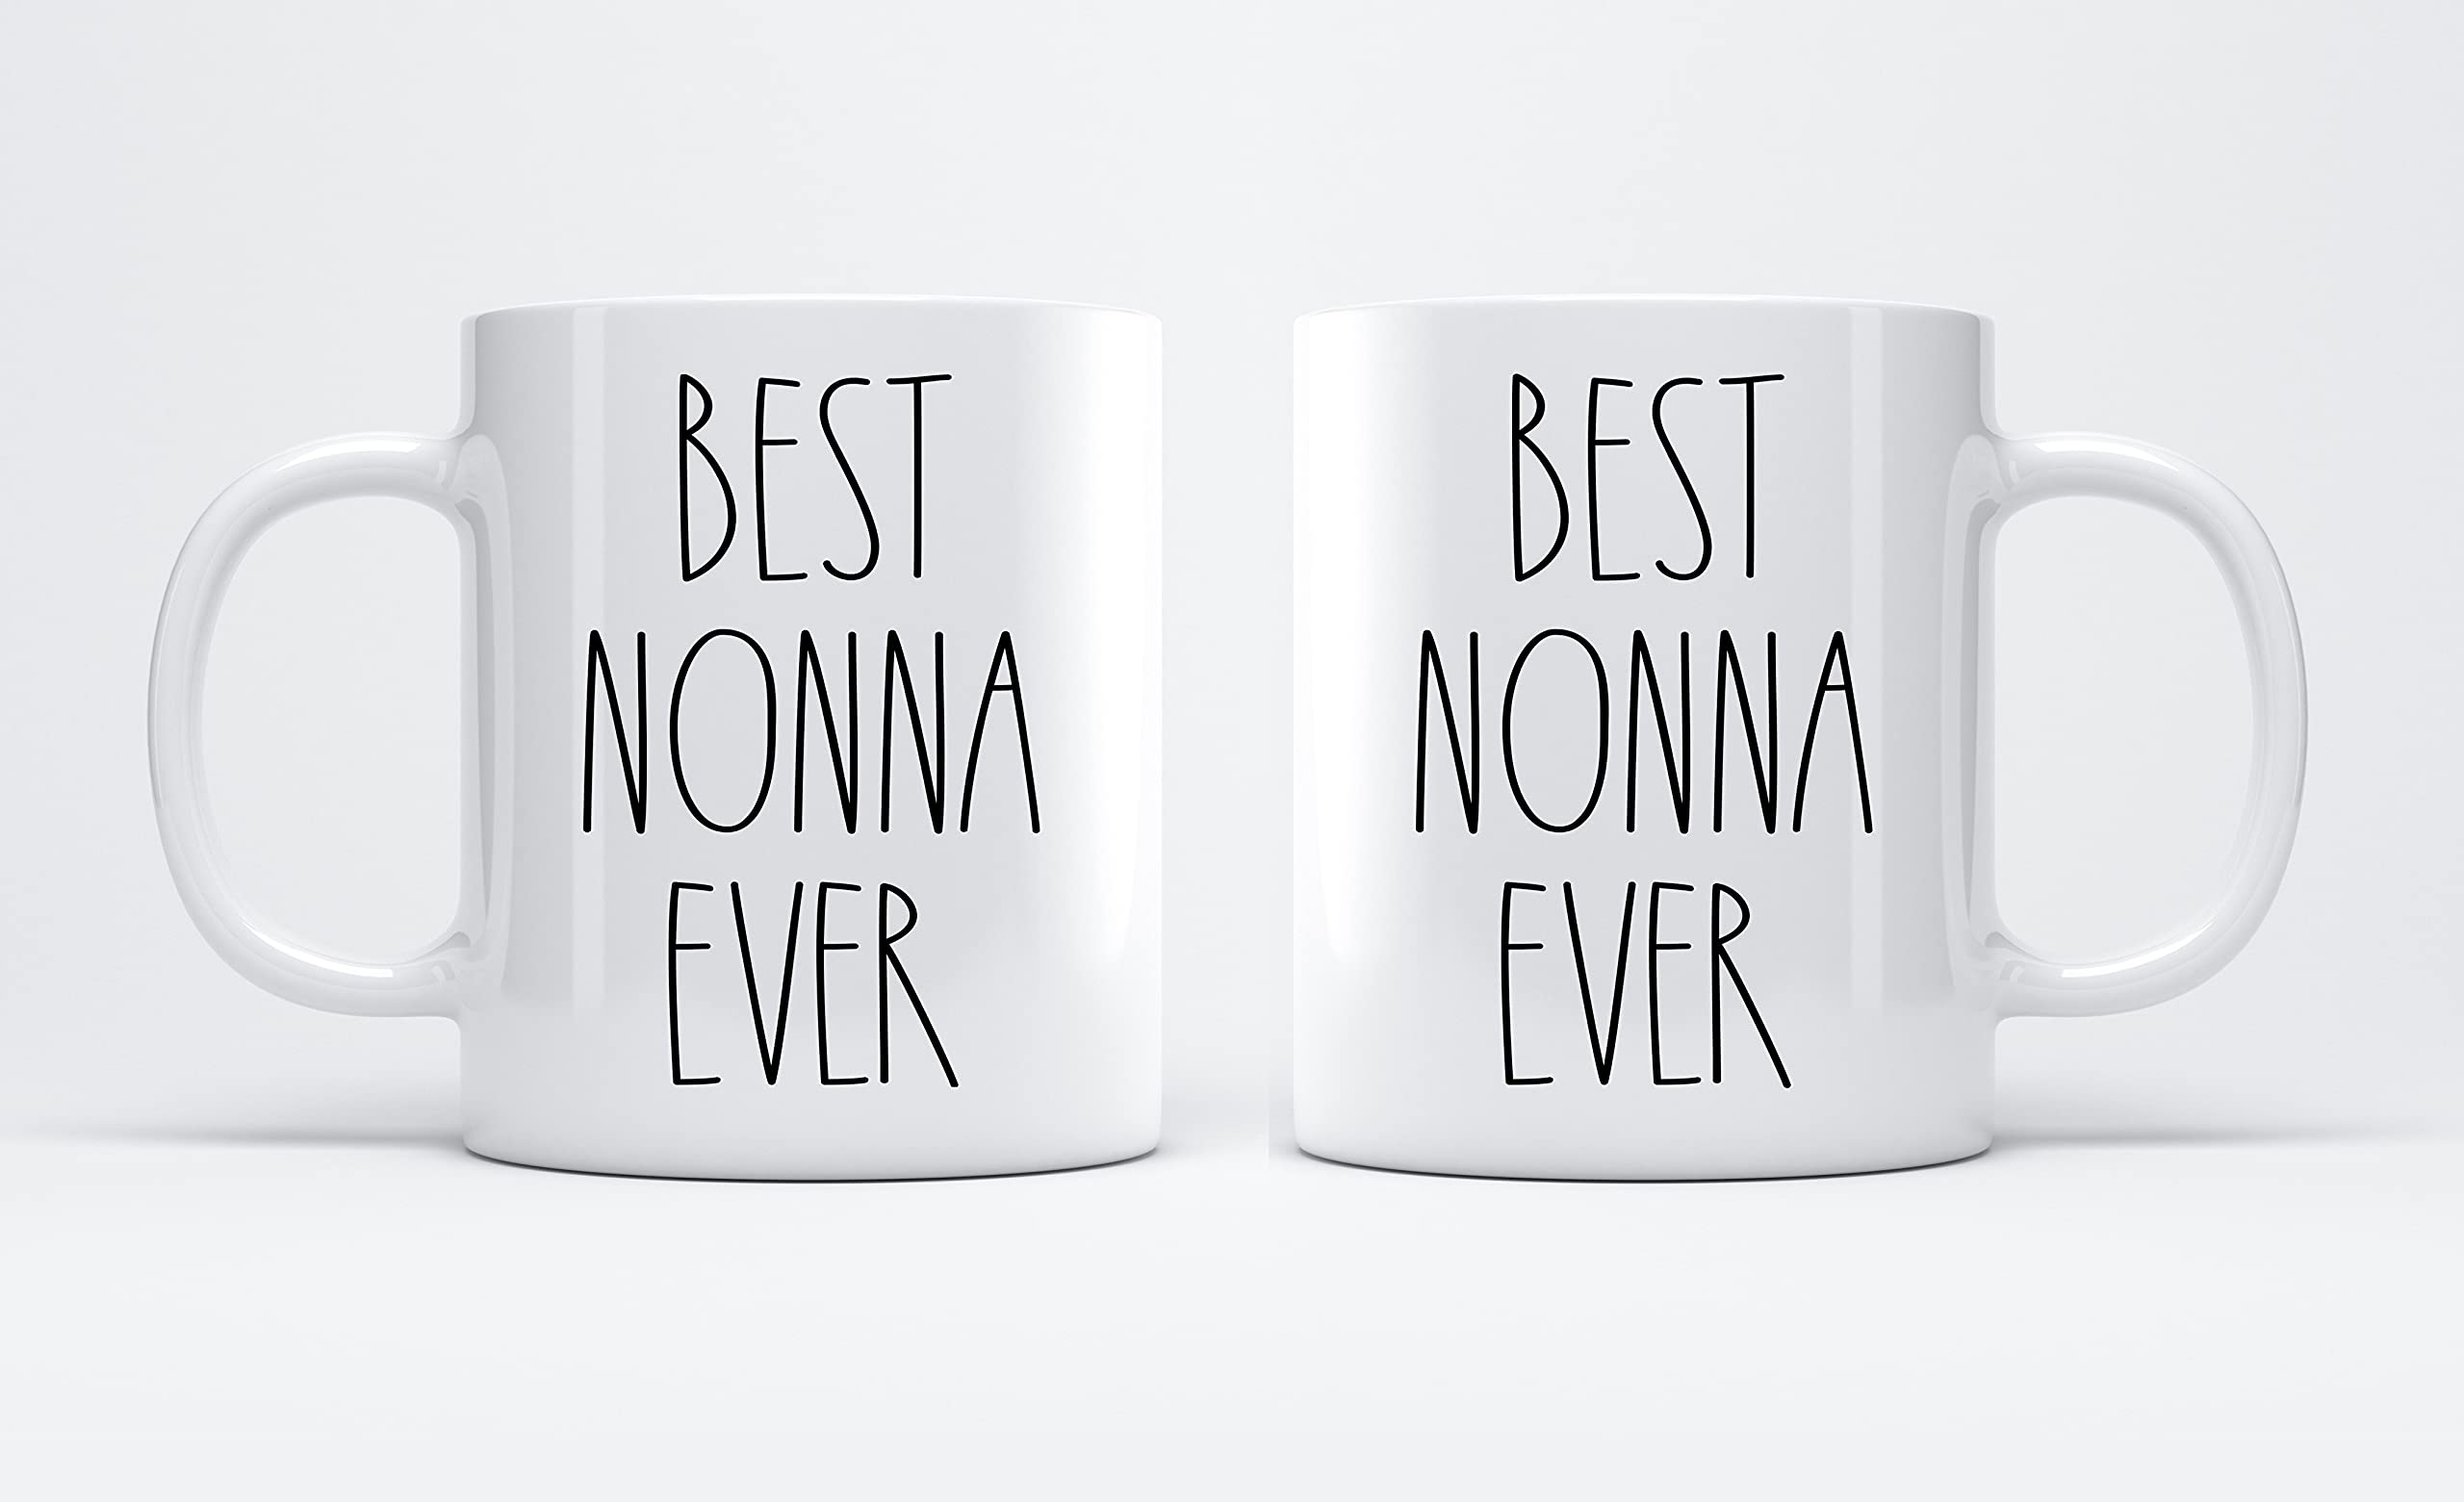 Best Nonna Ever Coffee Mug - Gifts for Christmas - Nonna Birthday Gifts Coffee Mug - Father's Day/Mother's Day - Family Coffee Mug For Birthday Present For The Best Nonna Ever Mug 11oz